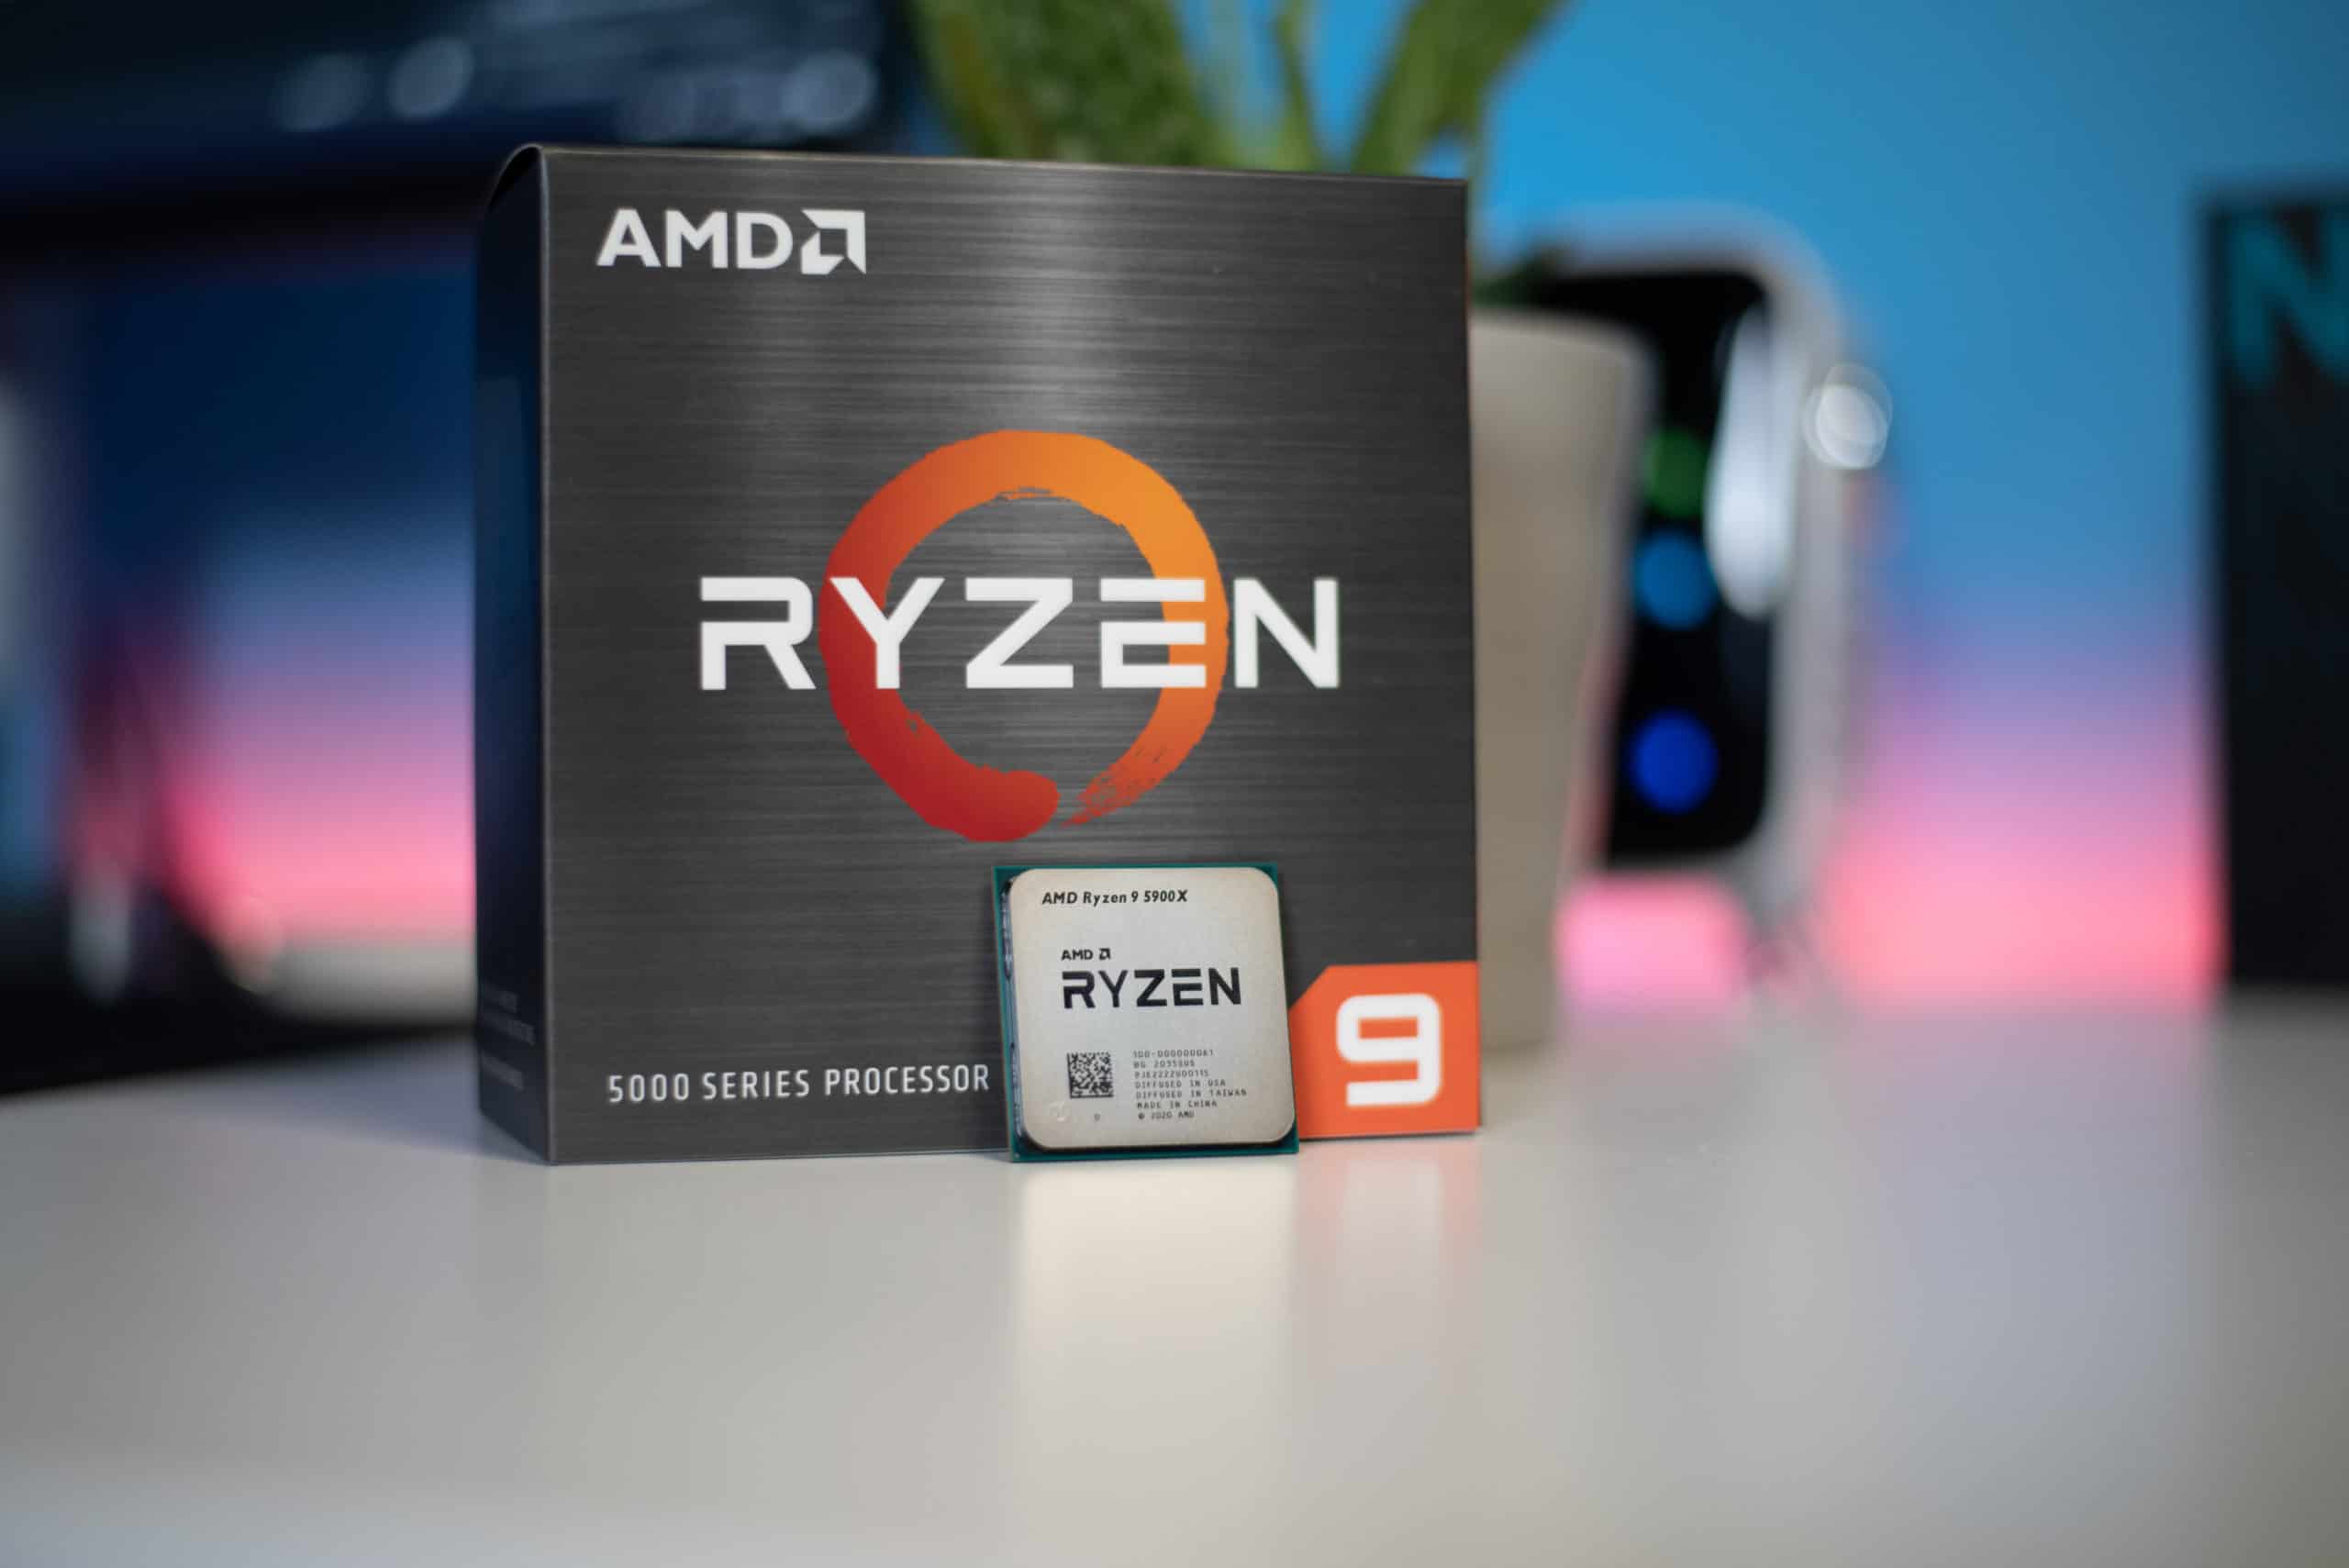 We made a video review of the AMD™ Ryzen™ 5900X 